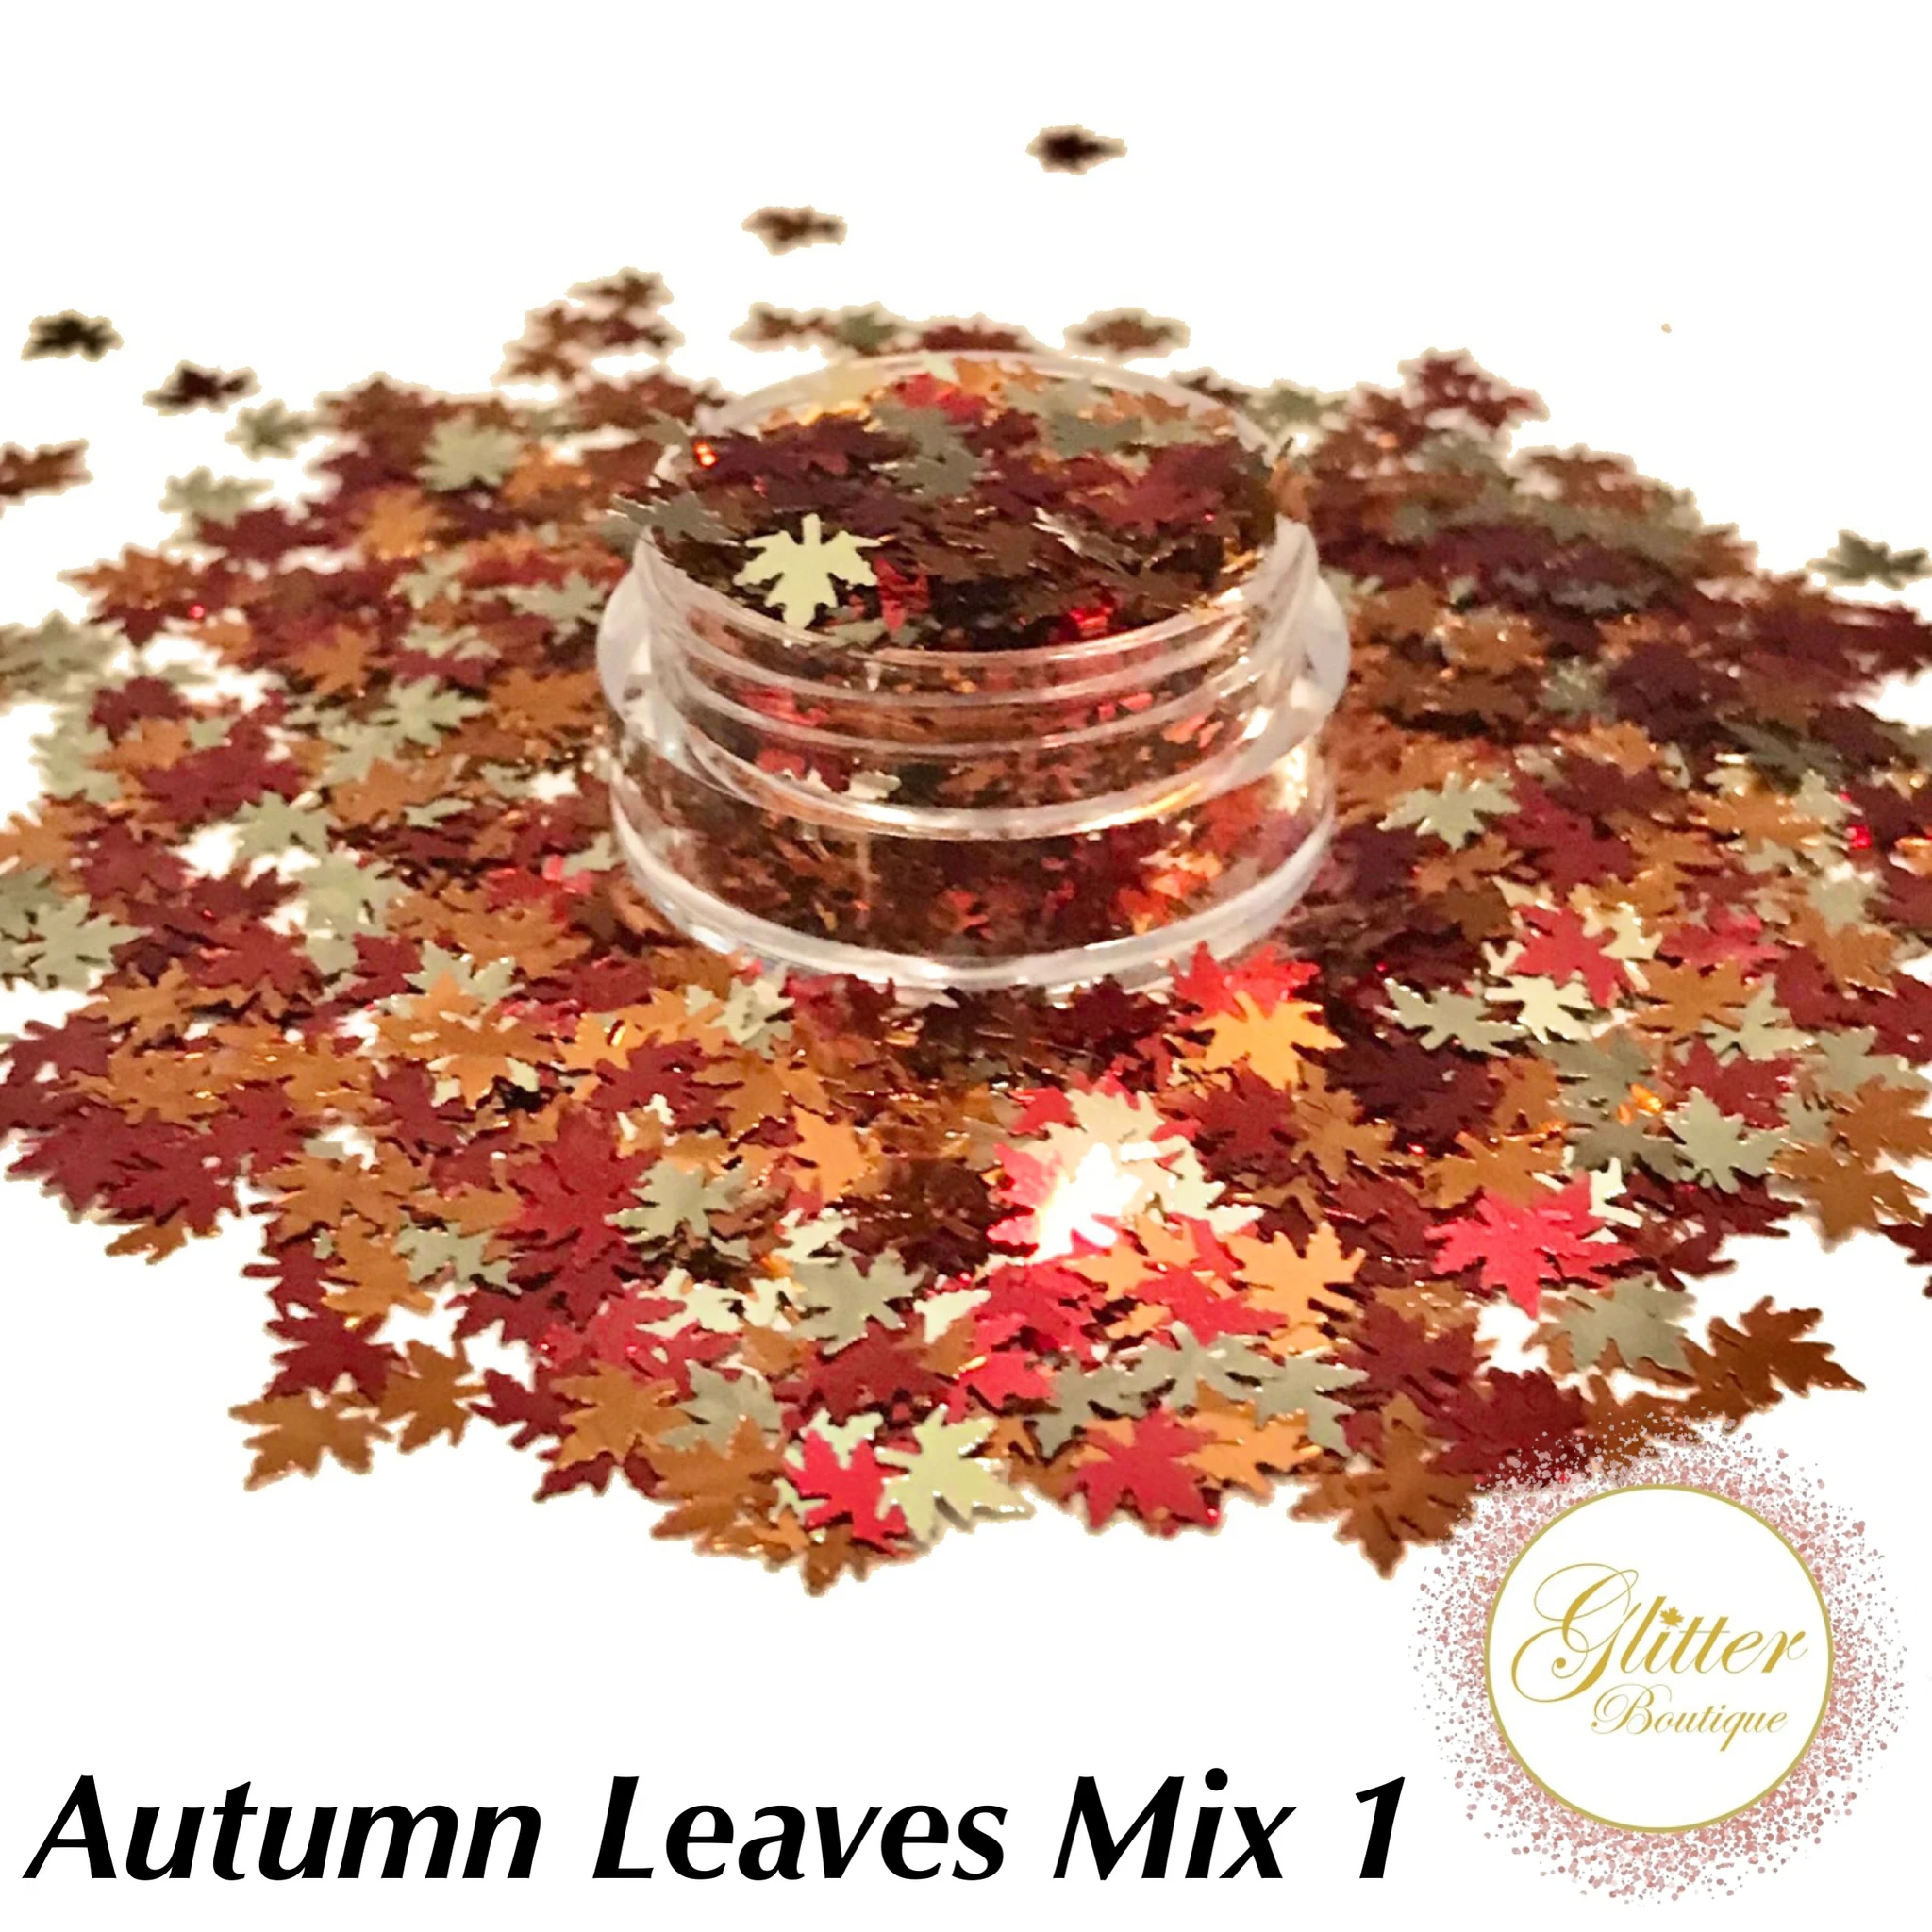 Glitter Boutique - Autumn Leaves Mix 1 - Creata Beauty - Professional Beauty Products